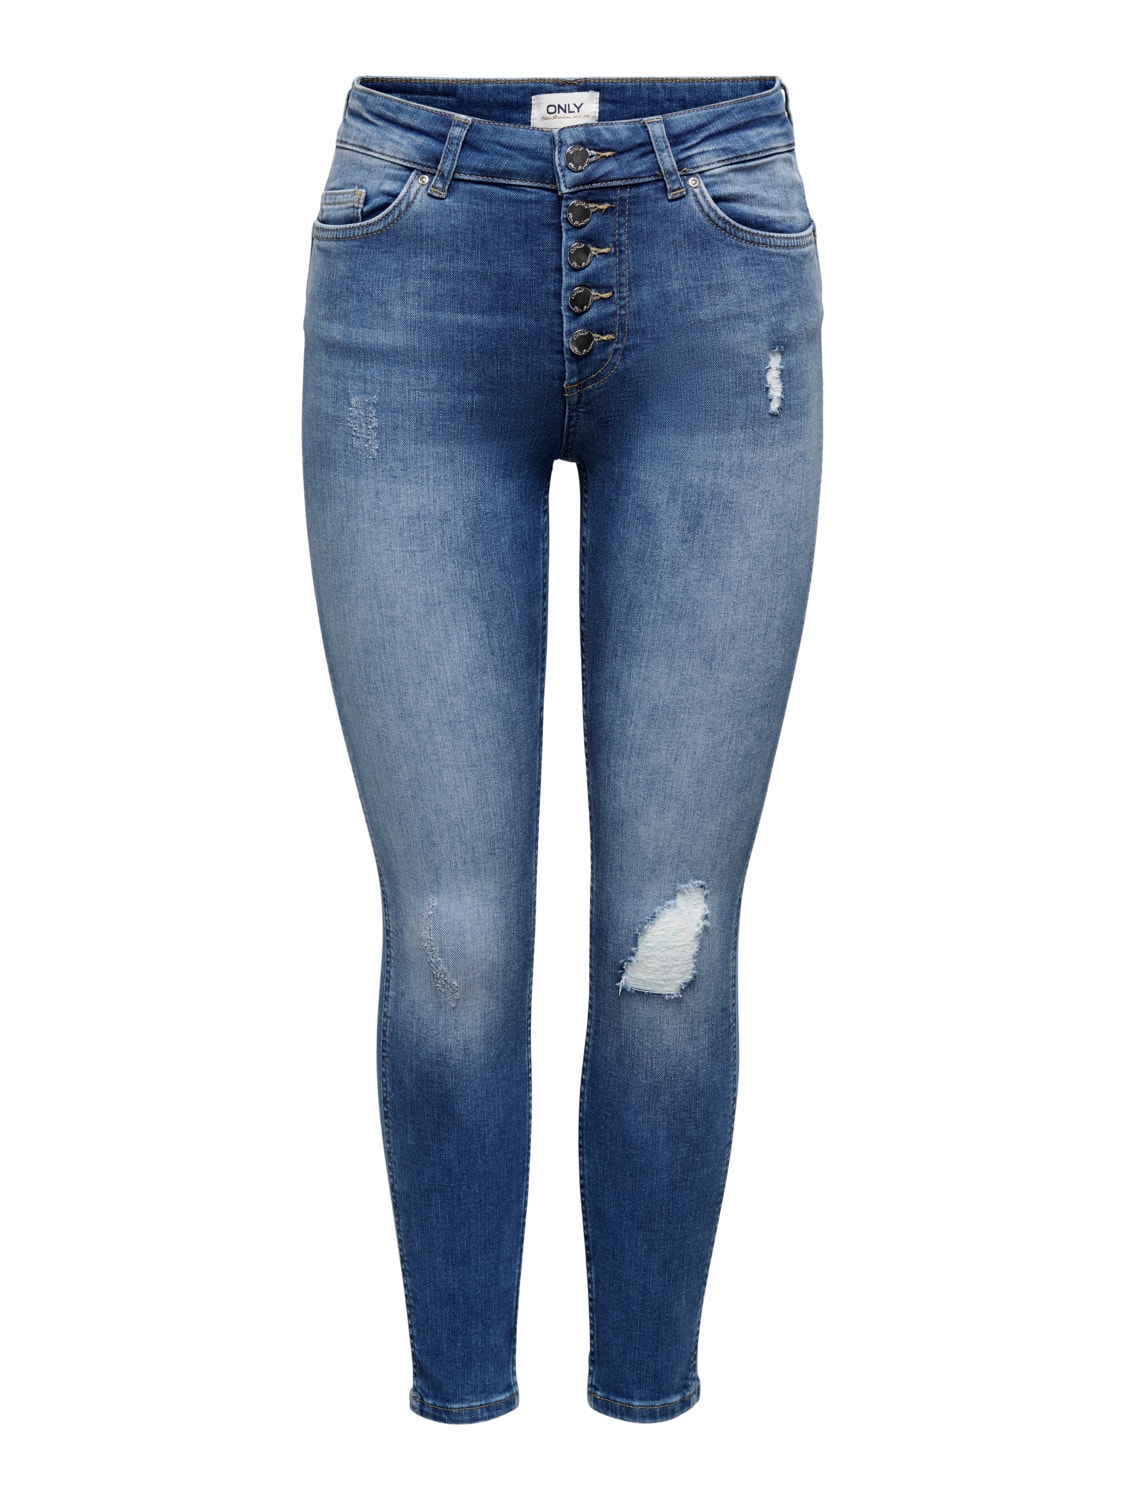 ONLY Jeans Skinny Fit Taille moyenne -Medium Blue Denim - 15266329